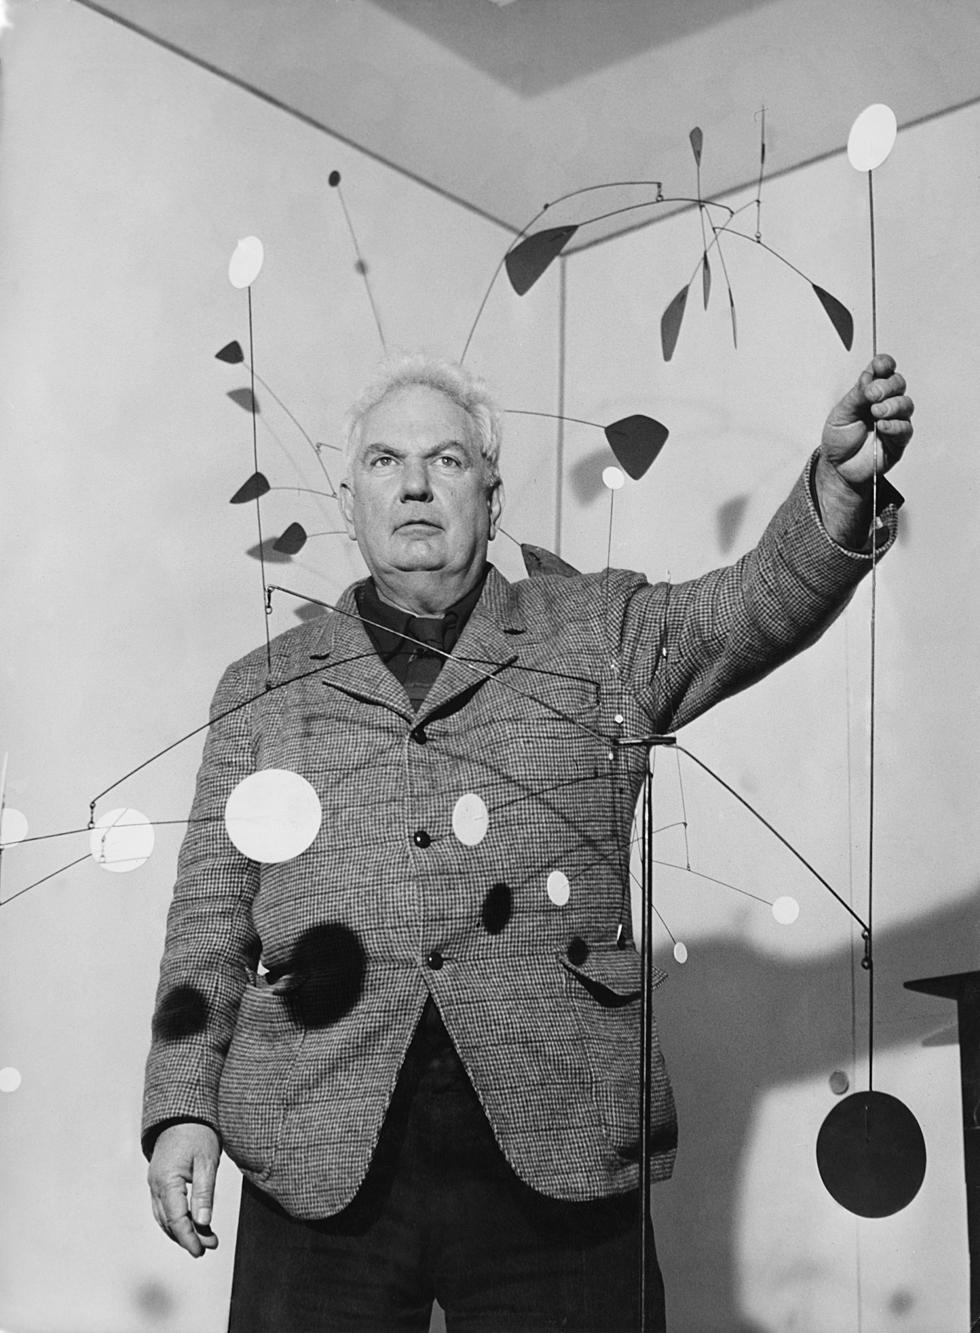 Hear About Alexander Calder From Those Who Knew Him